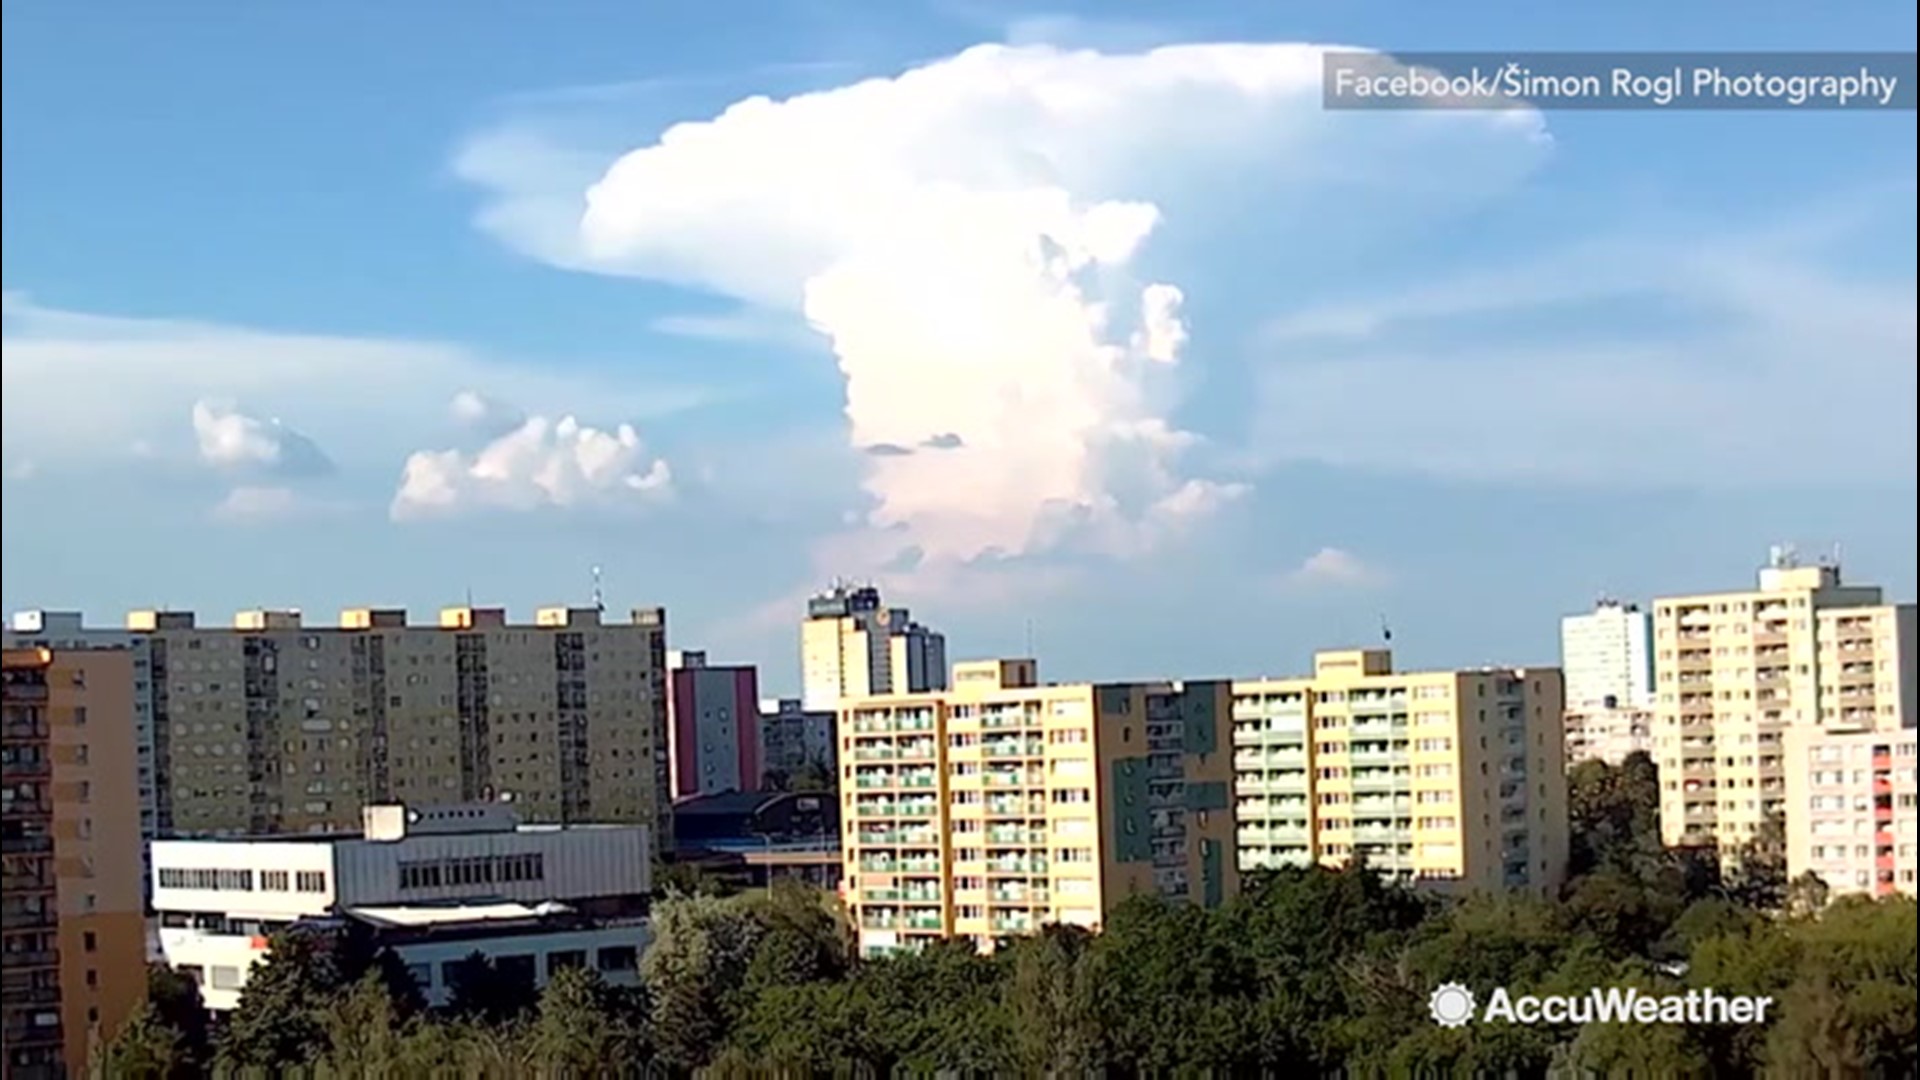 An impressive isolated thunderstorm appeared in the Czech Republic in Prague on June 5. The textbook storm developed a massive anvil cloud that filled the sky as the storm matured.